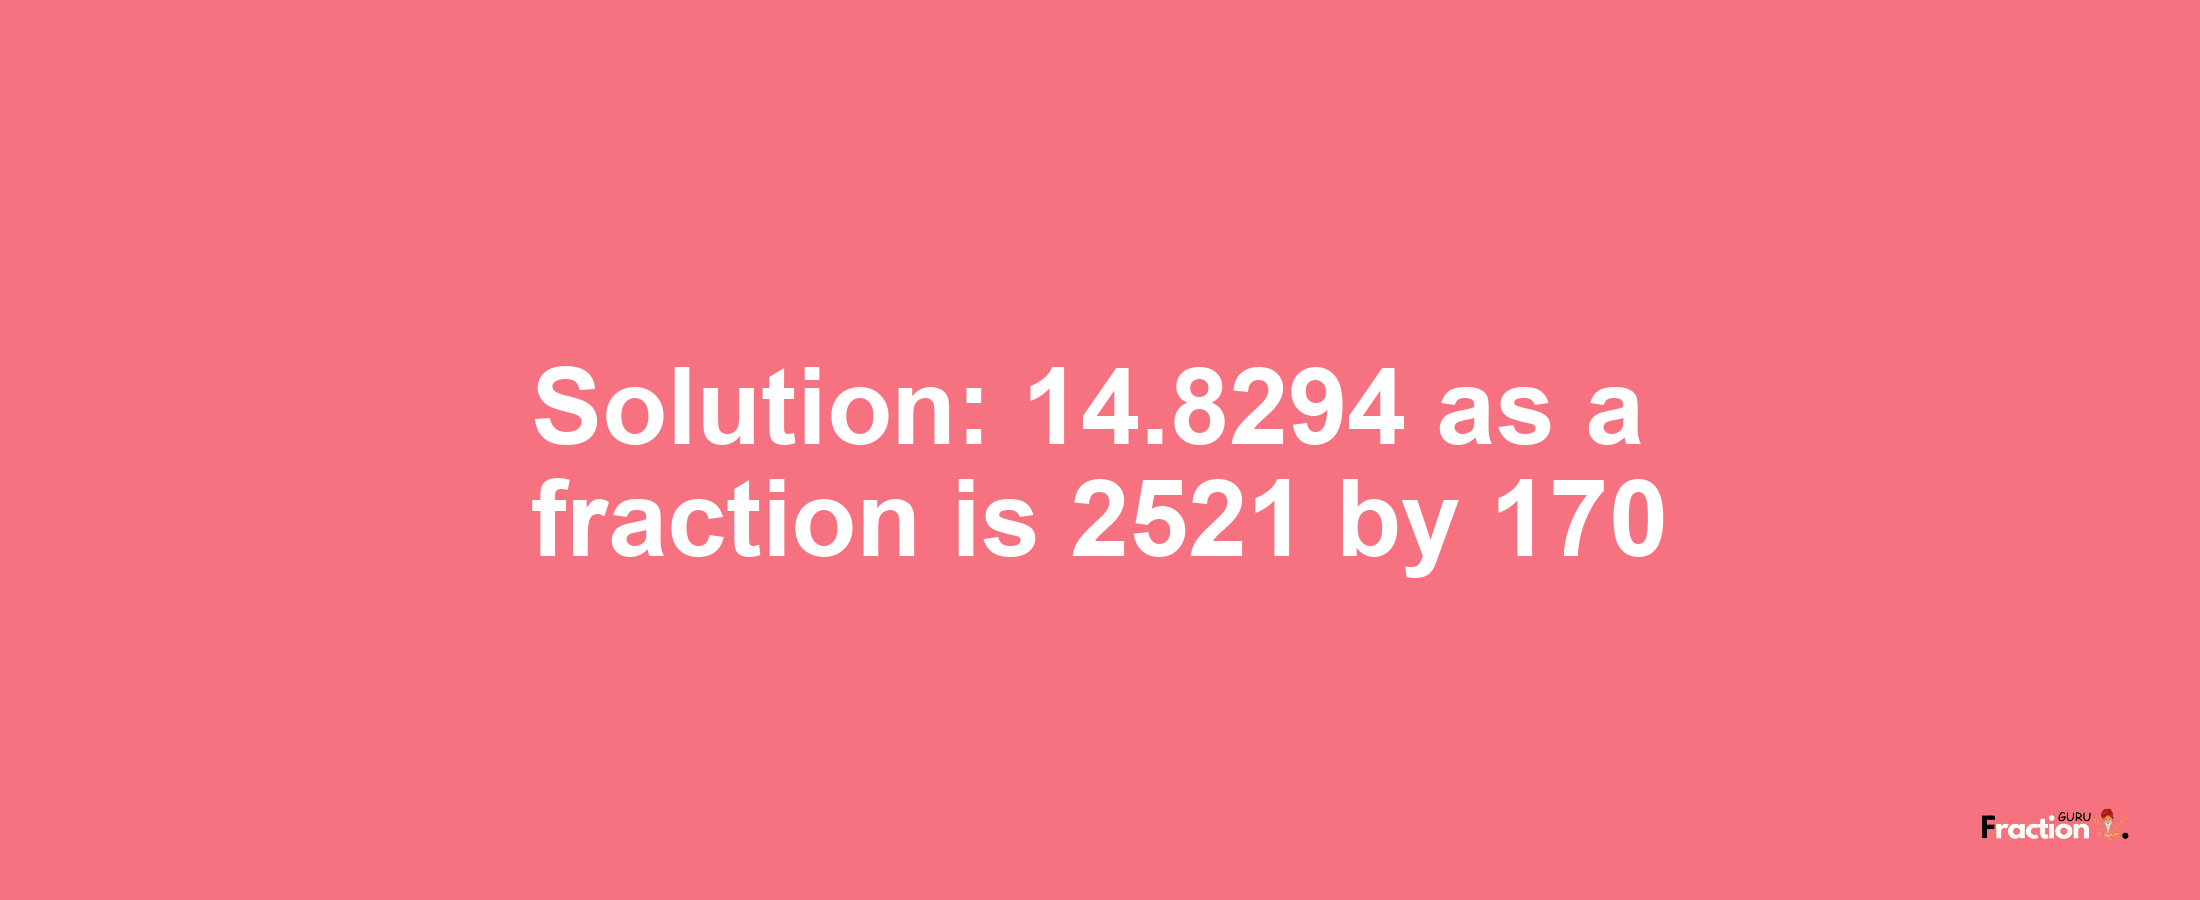 Solution:14.8294 as a fraction is 2521/170